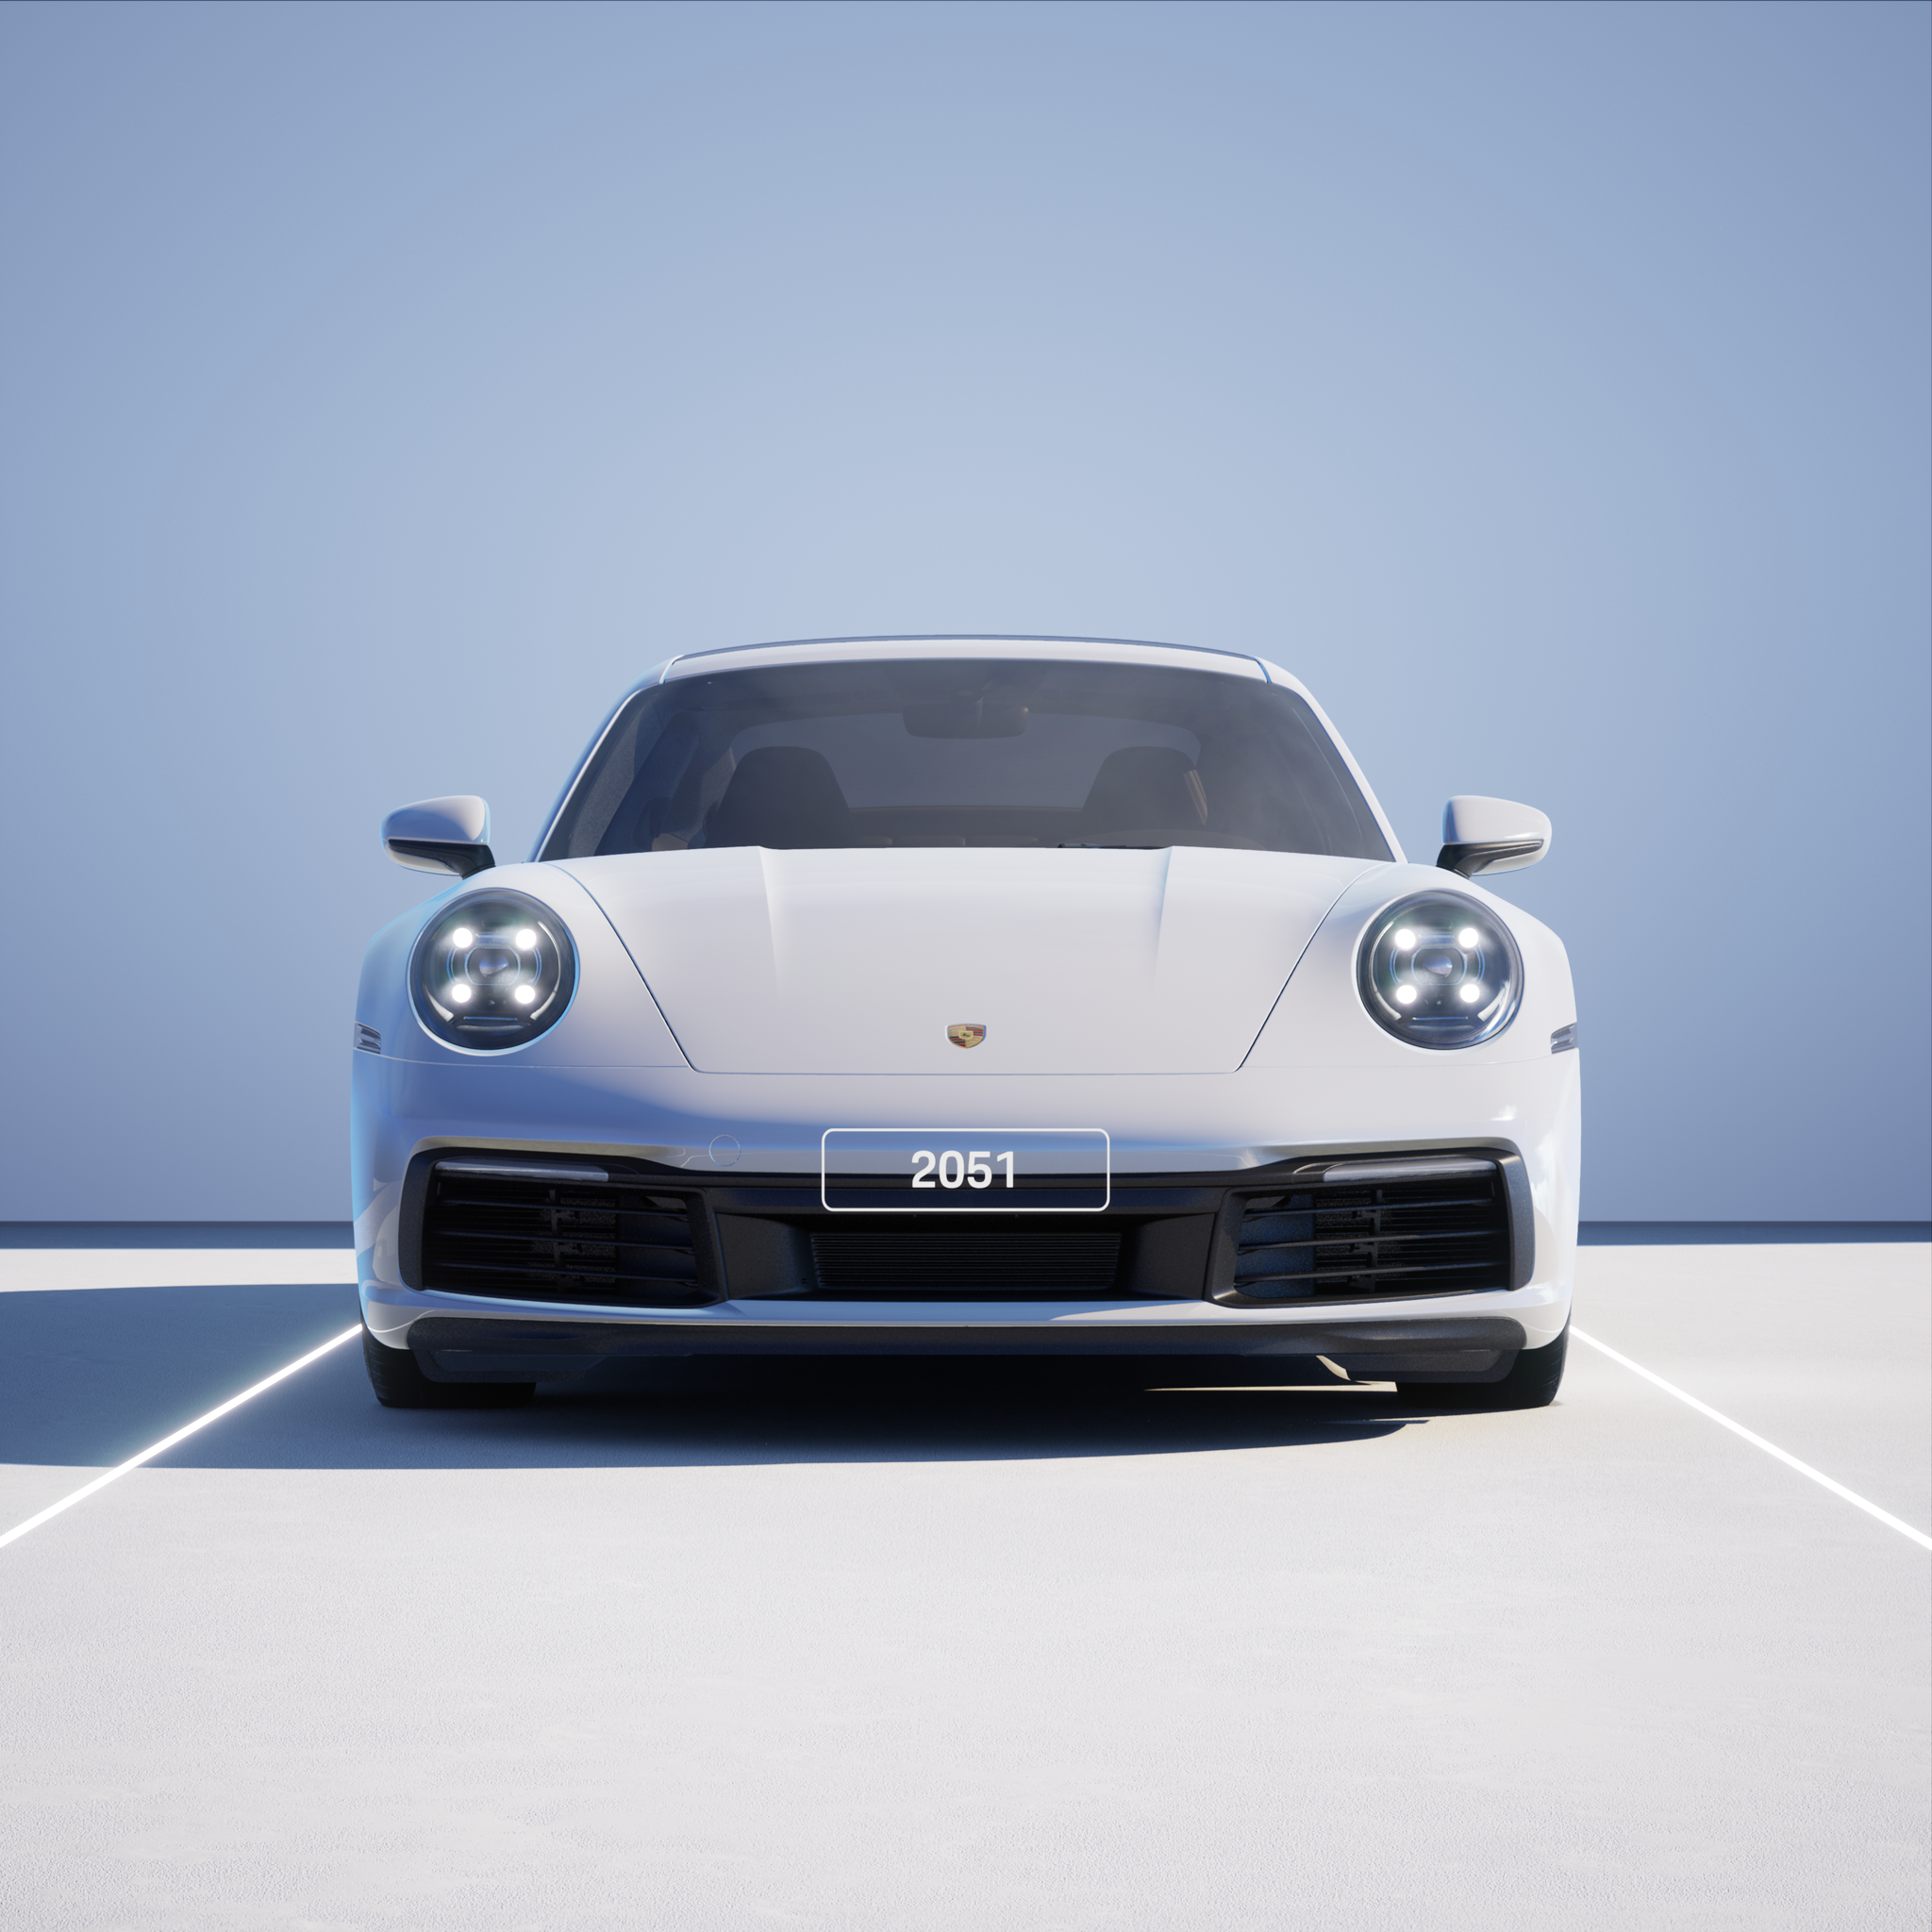 The PORSCHΞ 911 2051 image in phase